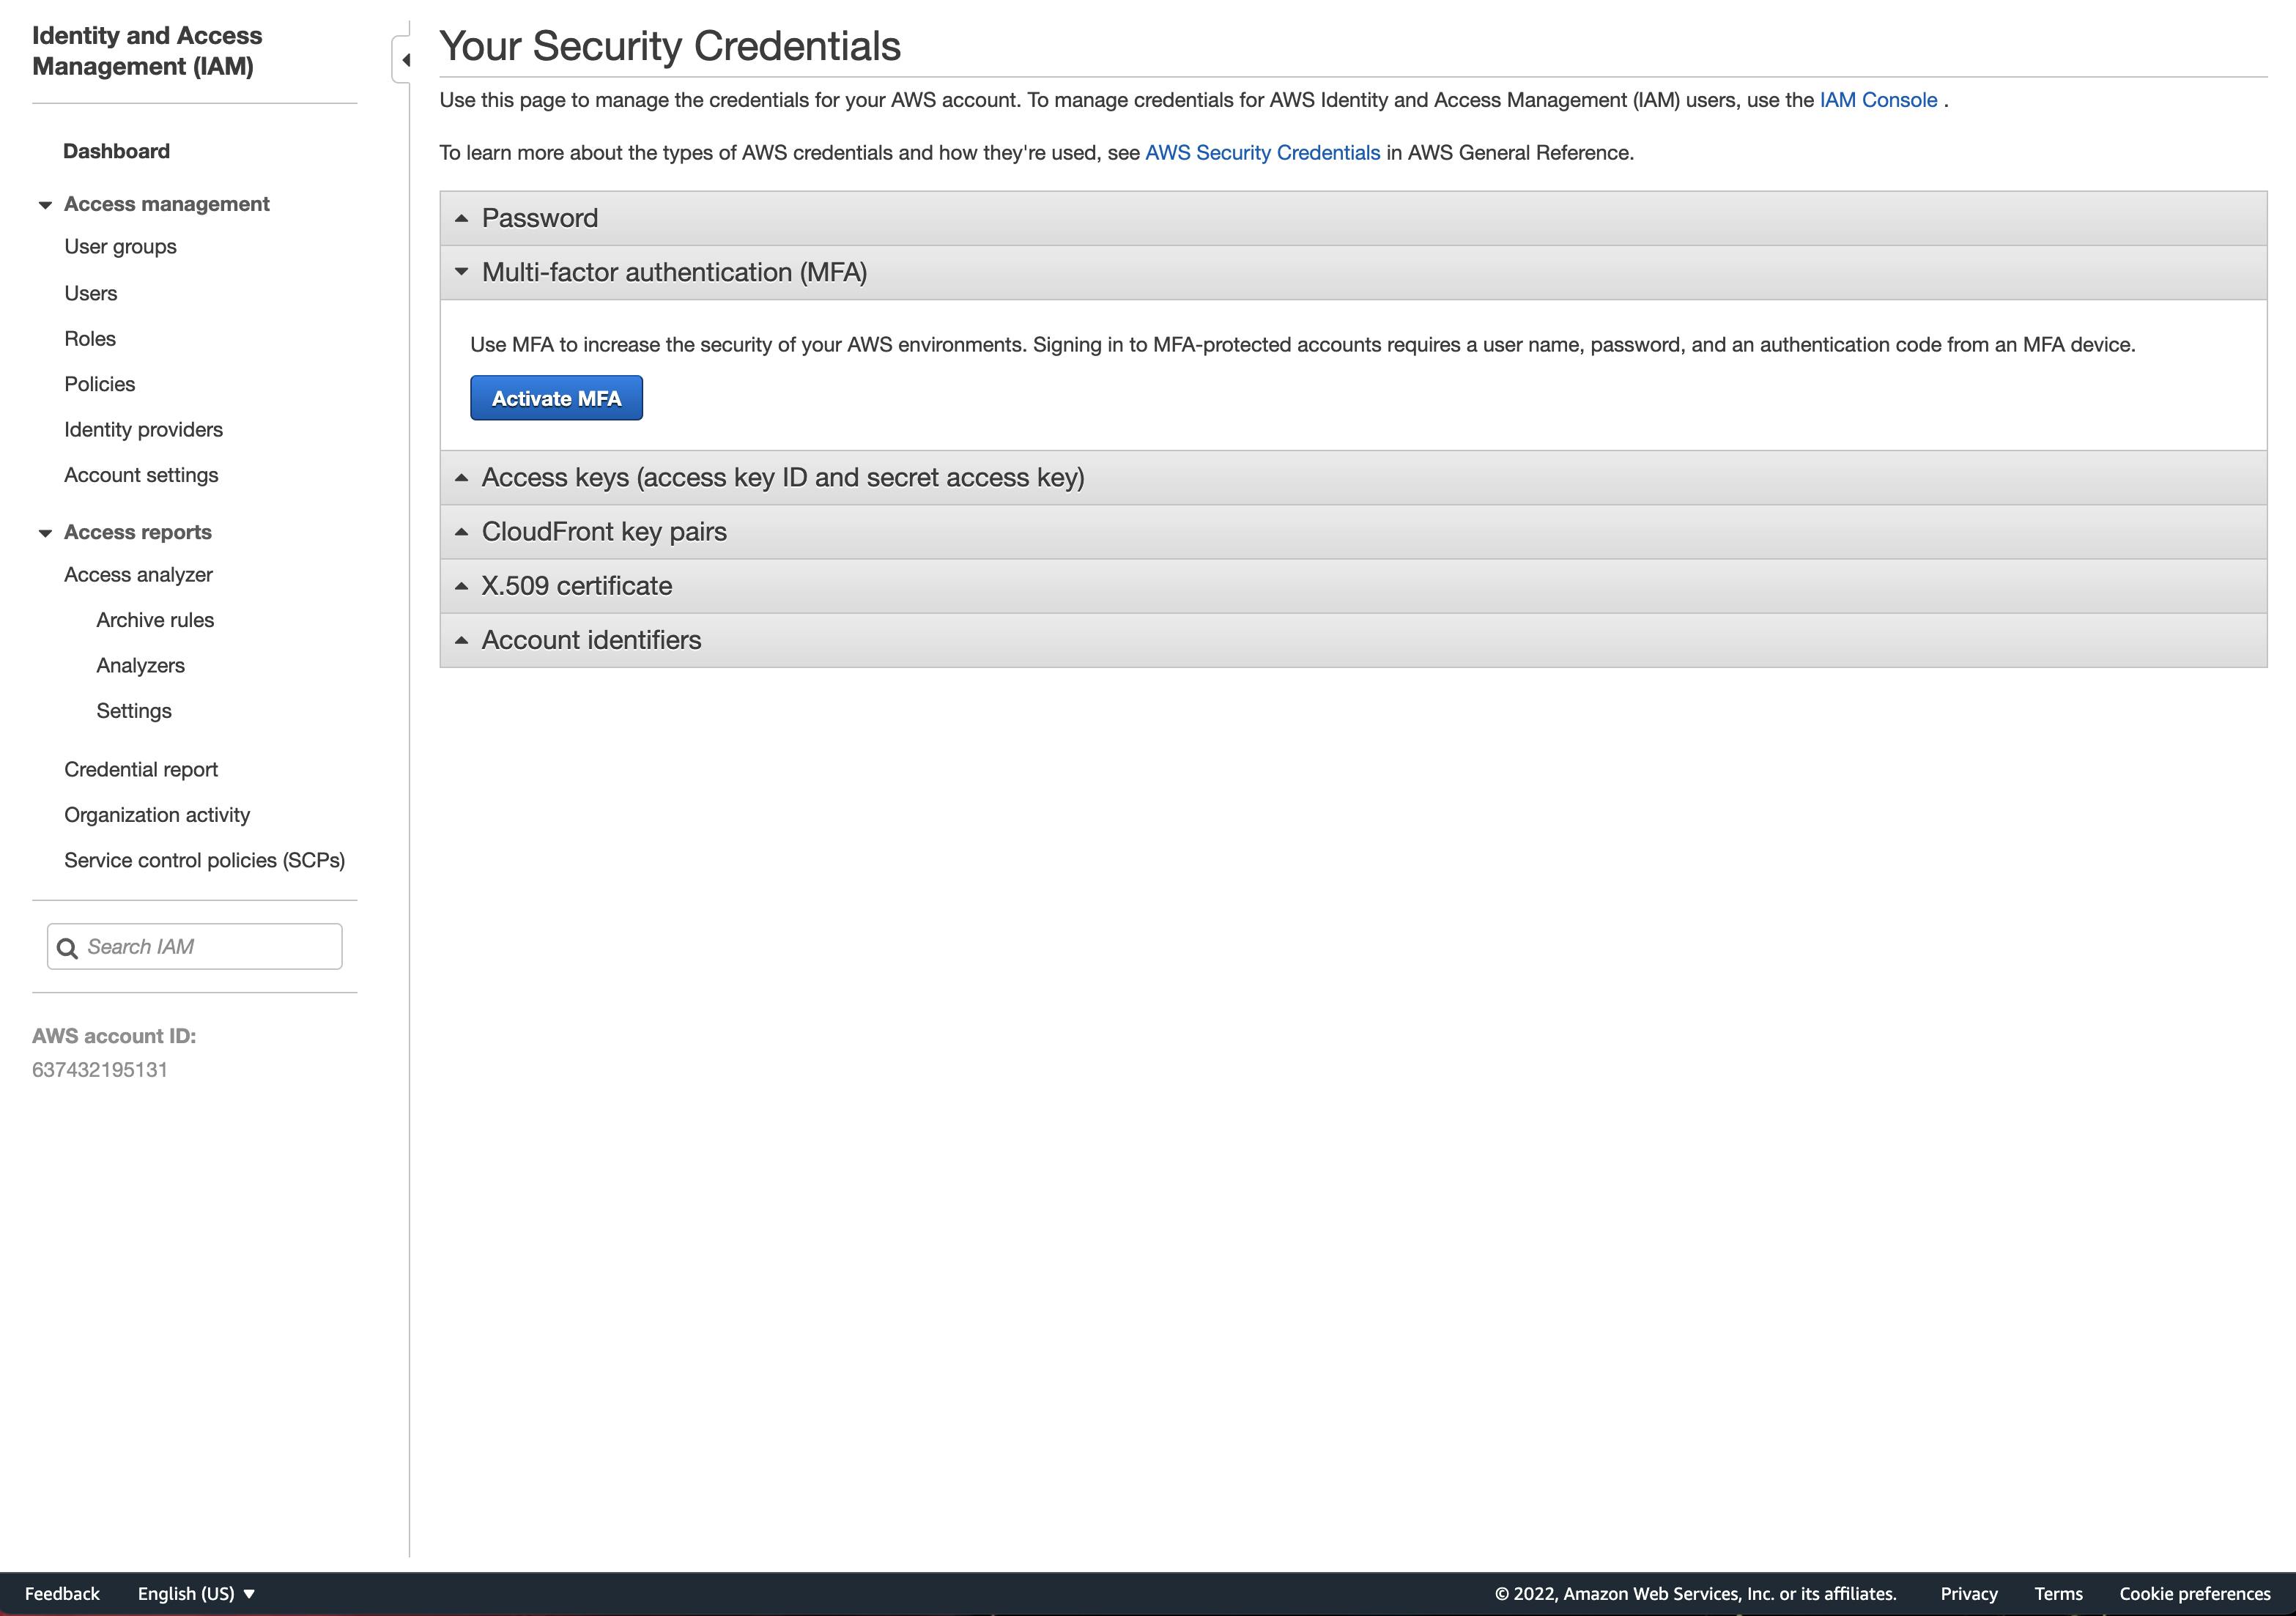 Your Security Credentials Screen